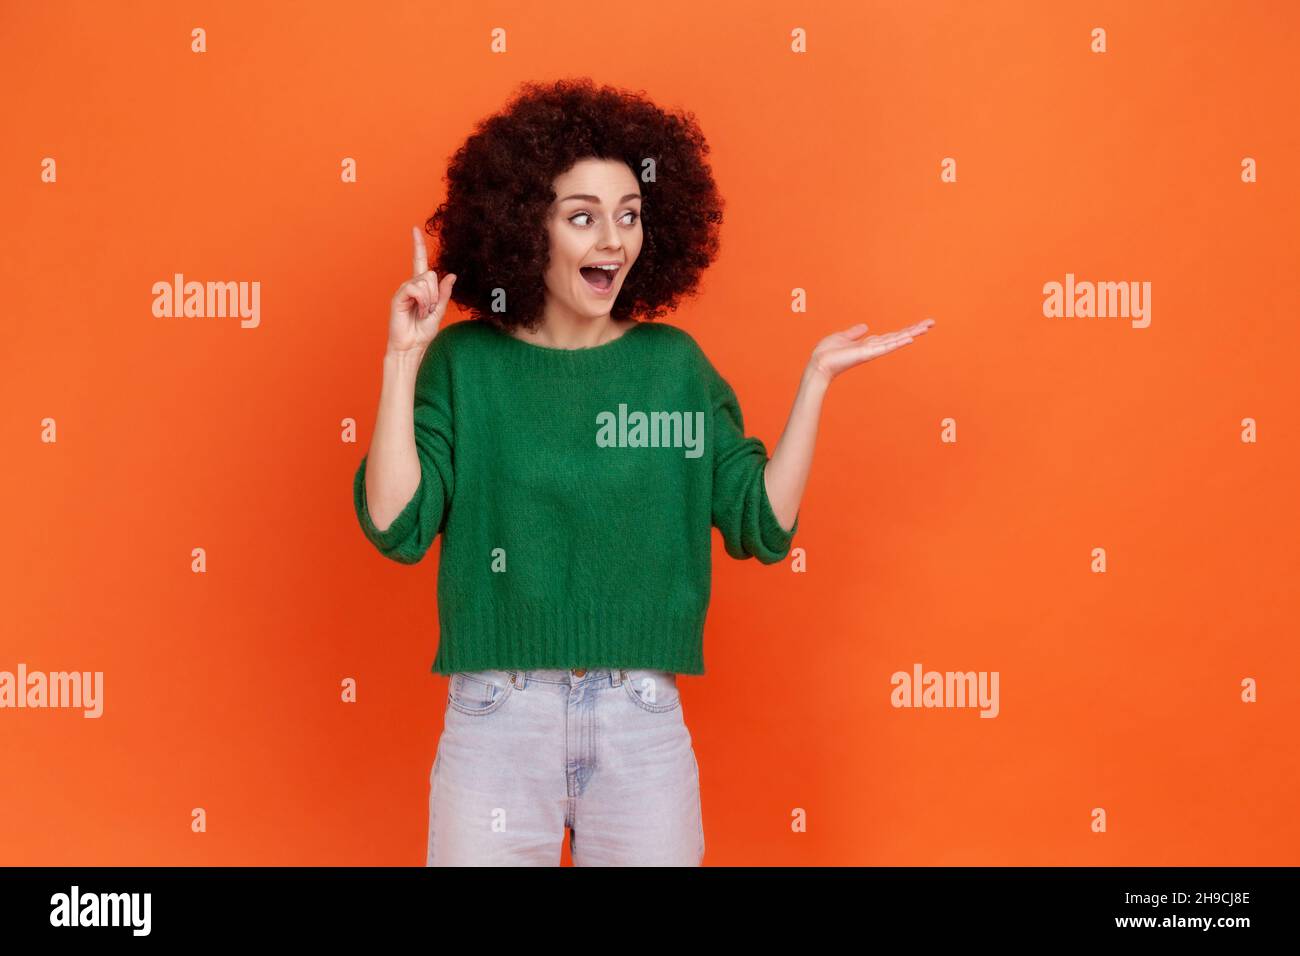 Positive woman with Afro hairstyle wearing green casual style sweater pointing finger up, has idea, presenting area for advertisement. Indoor studio shot isolated on orange background. Stock Photo